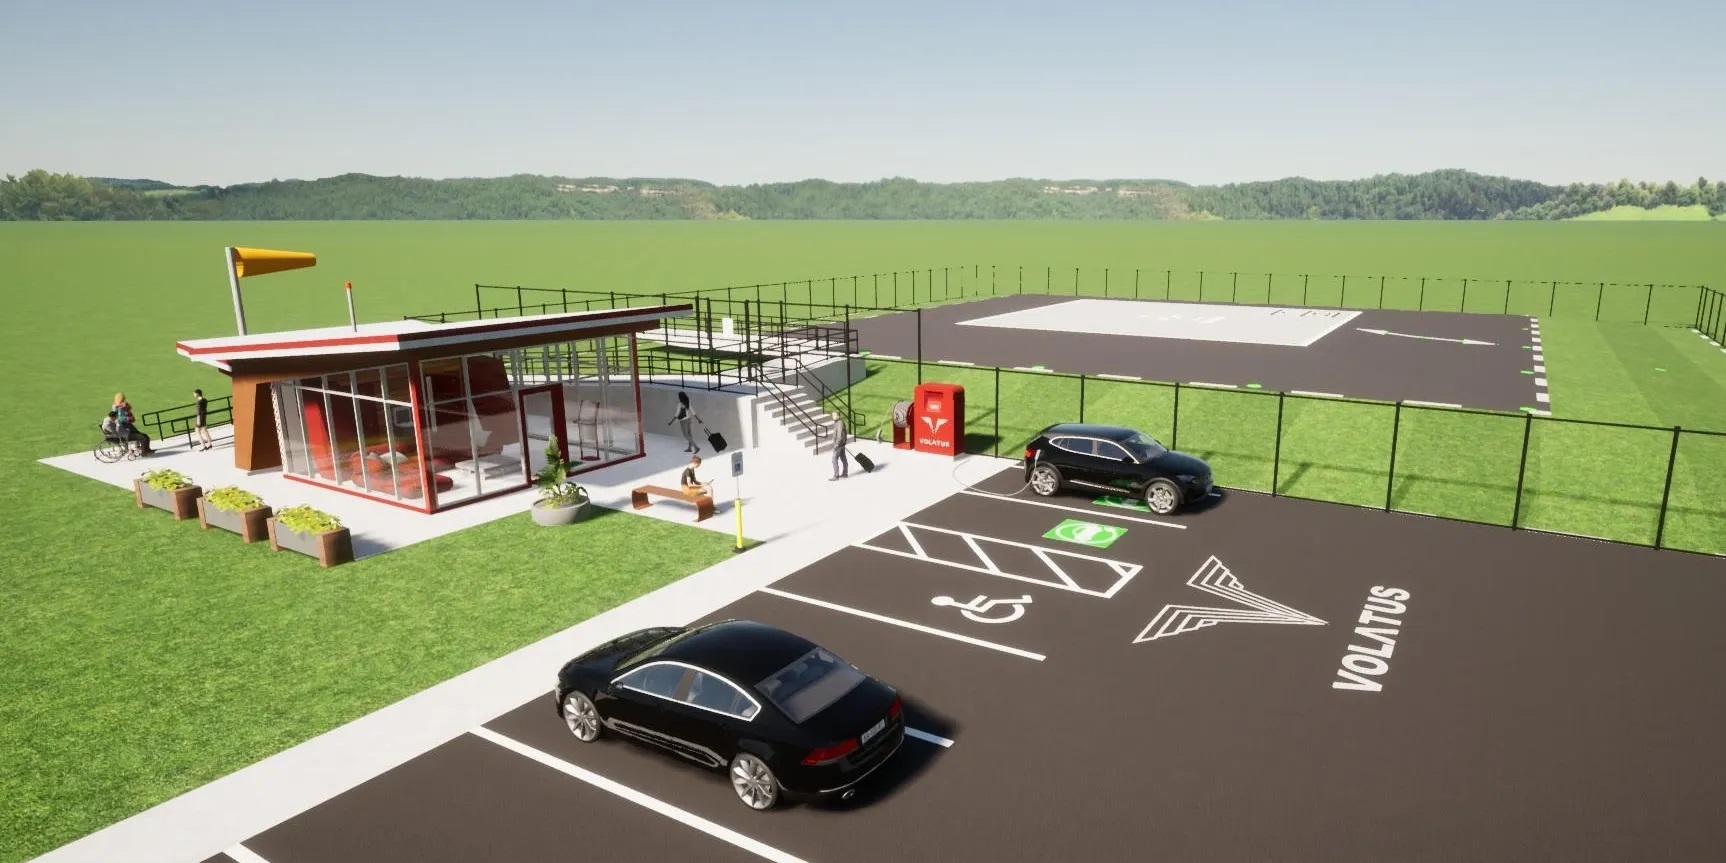 One of the three modular vertiport designs and charging stations for electric vehicles offered by VI&E Solutions.  Image: Volatus Infrastructure & Energy Solutions